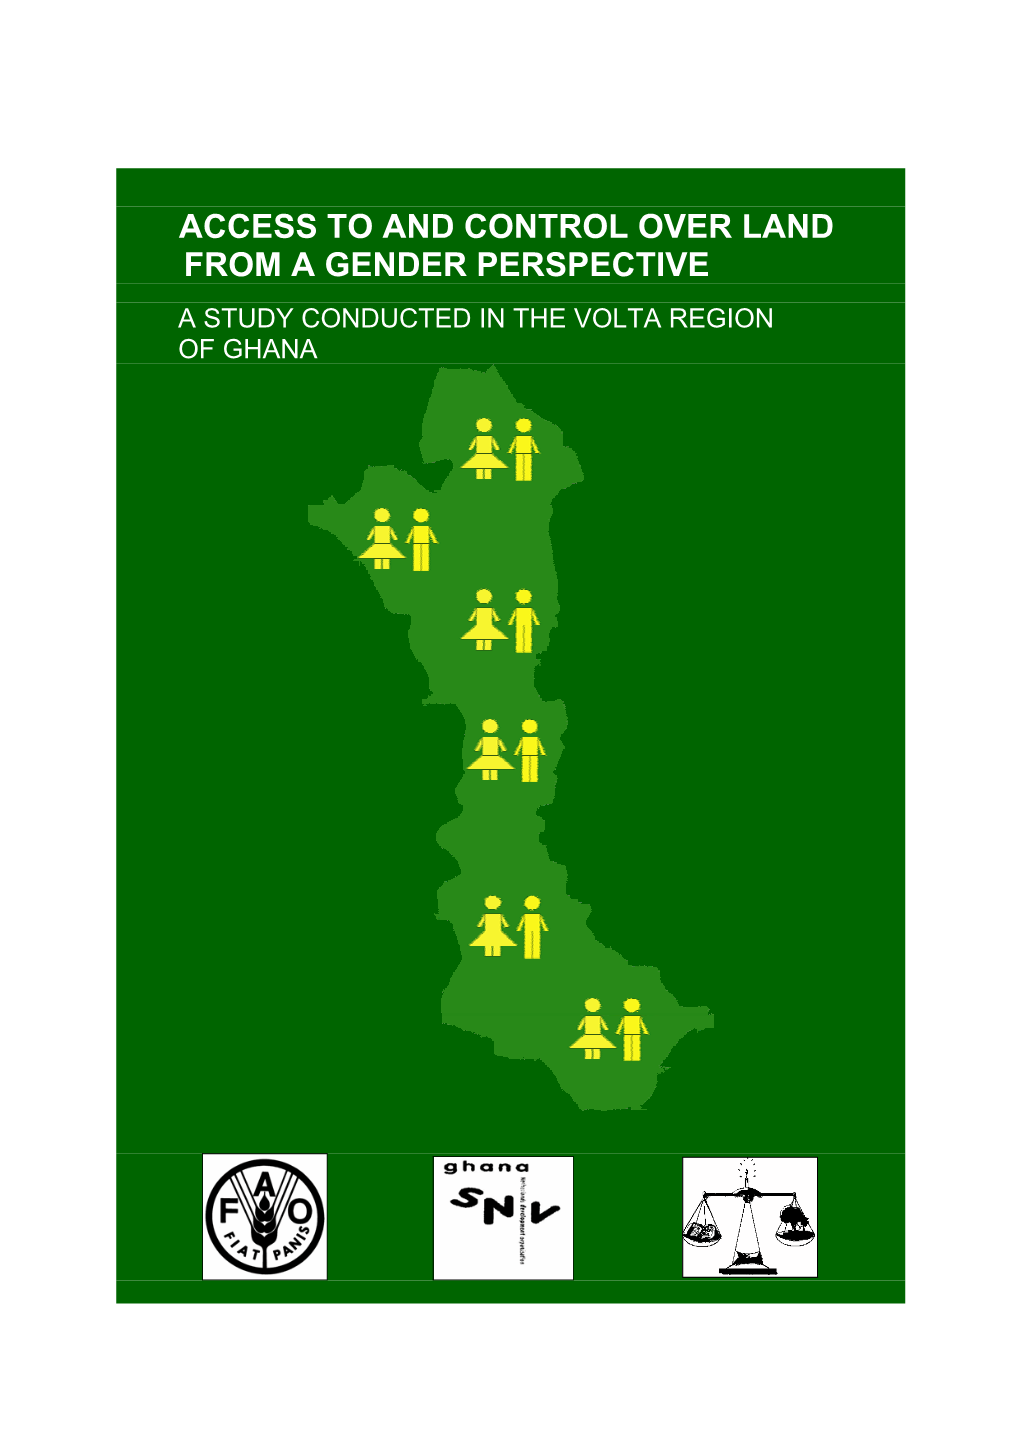 Access to and Control Over Land from a Gender Perspective